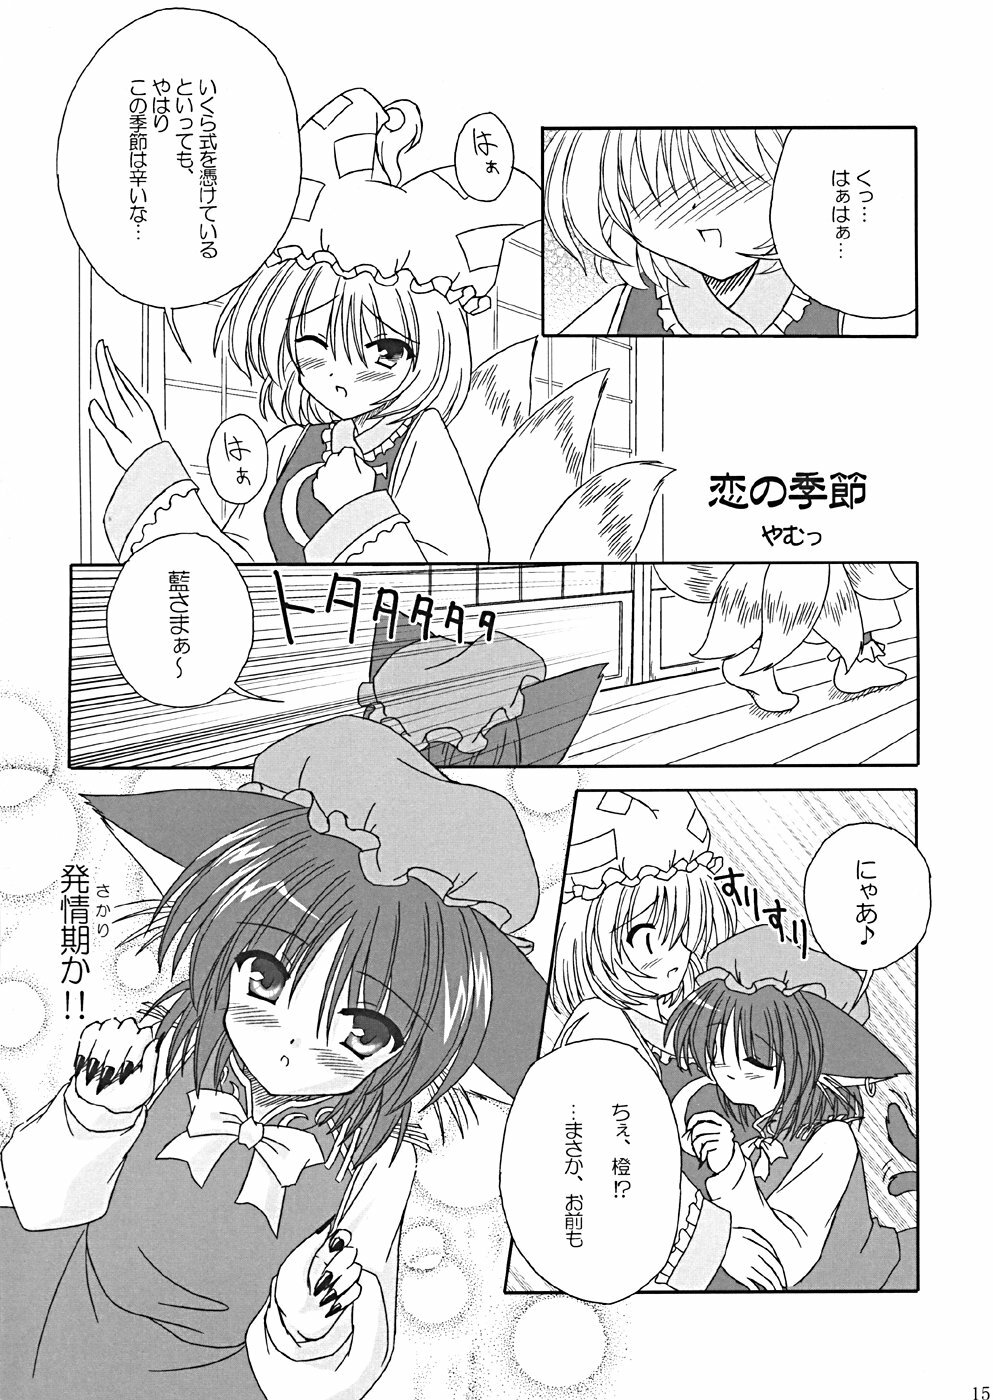 (CR35) [LemonMaiden (Various)] Oukasai ～ Cherry Point MAX (Touhou Project) page 18 full